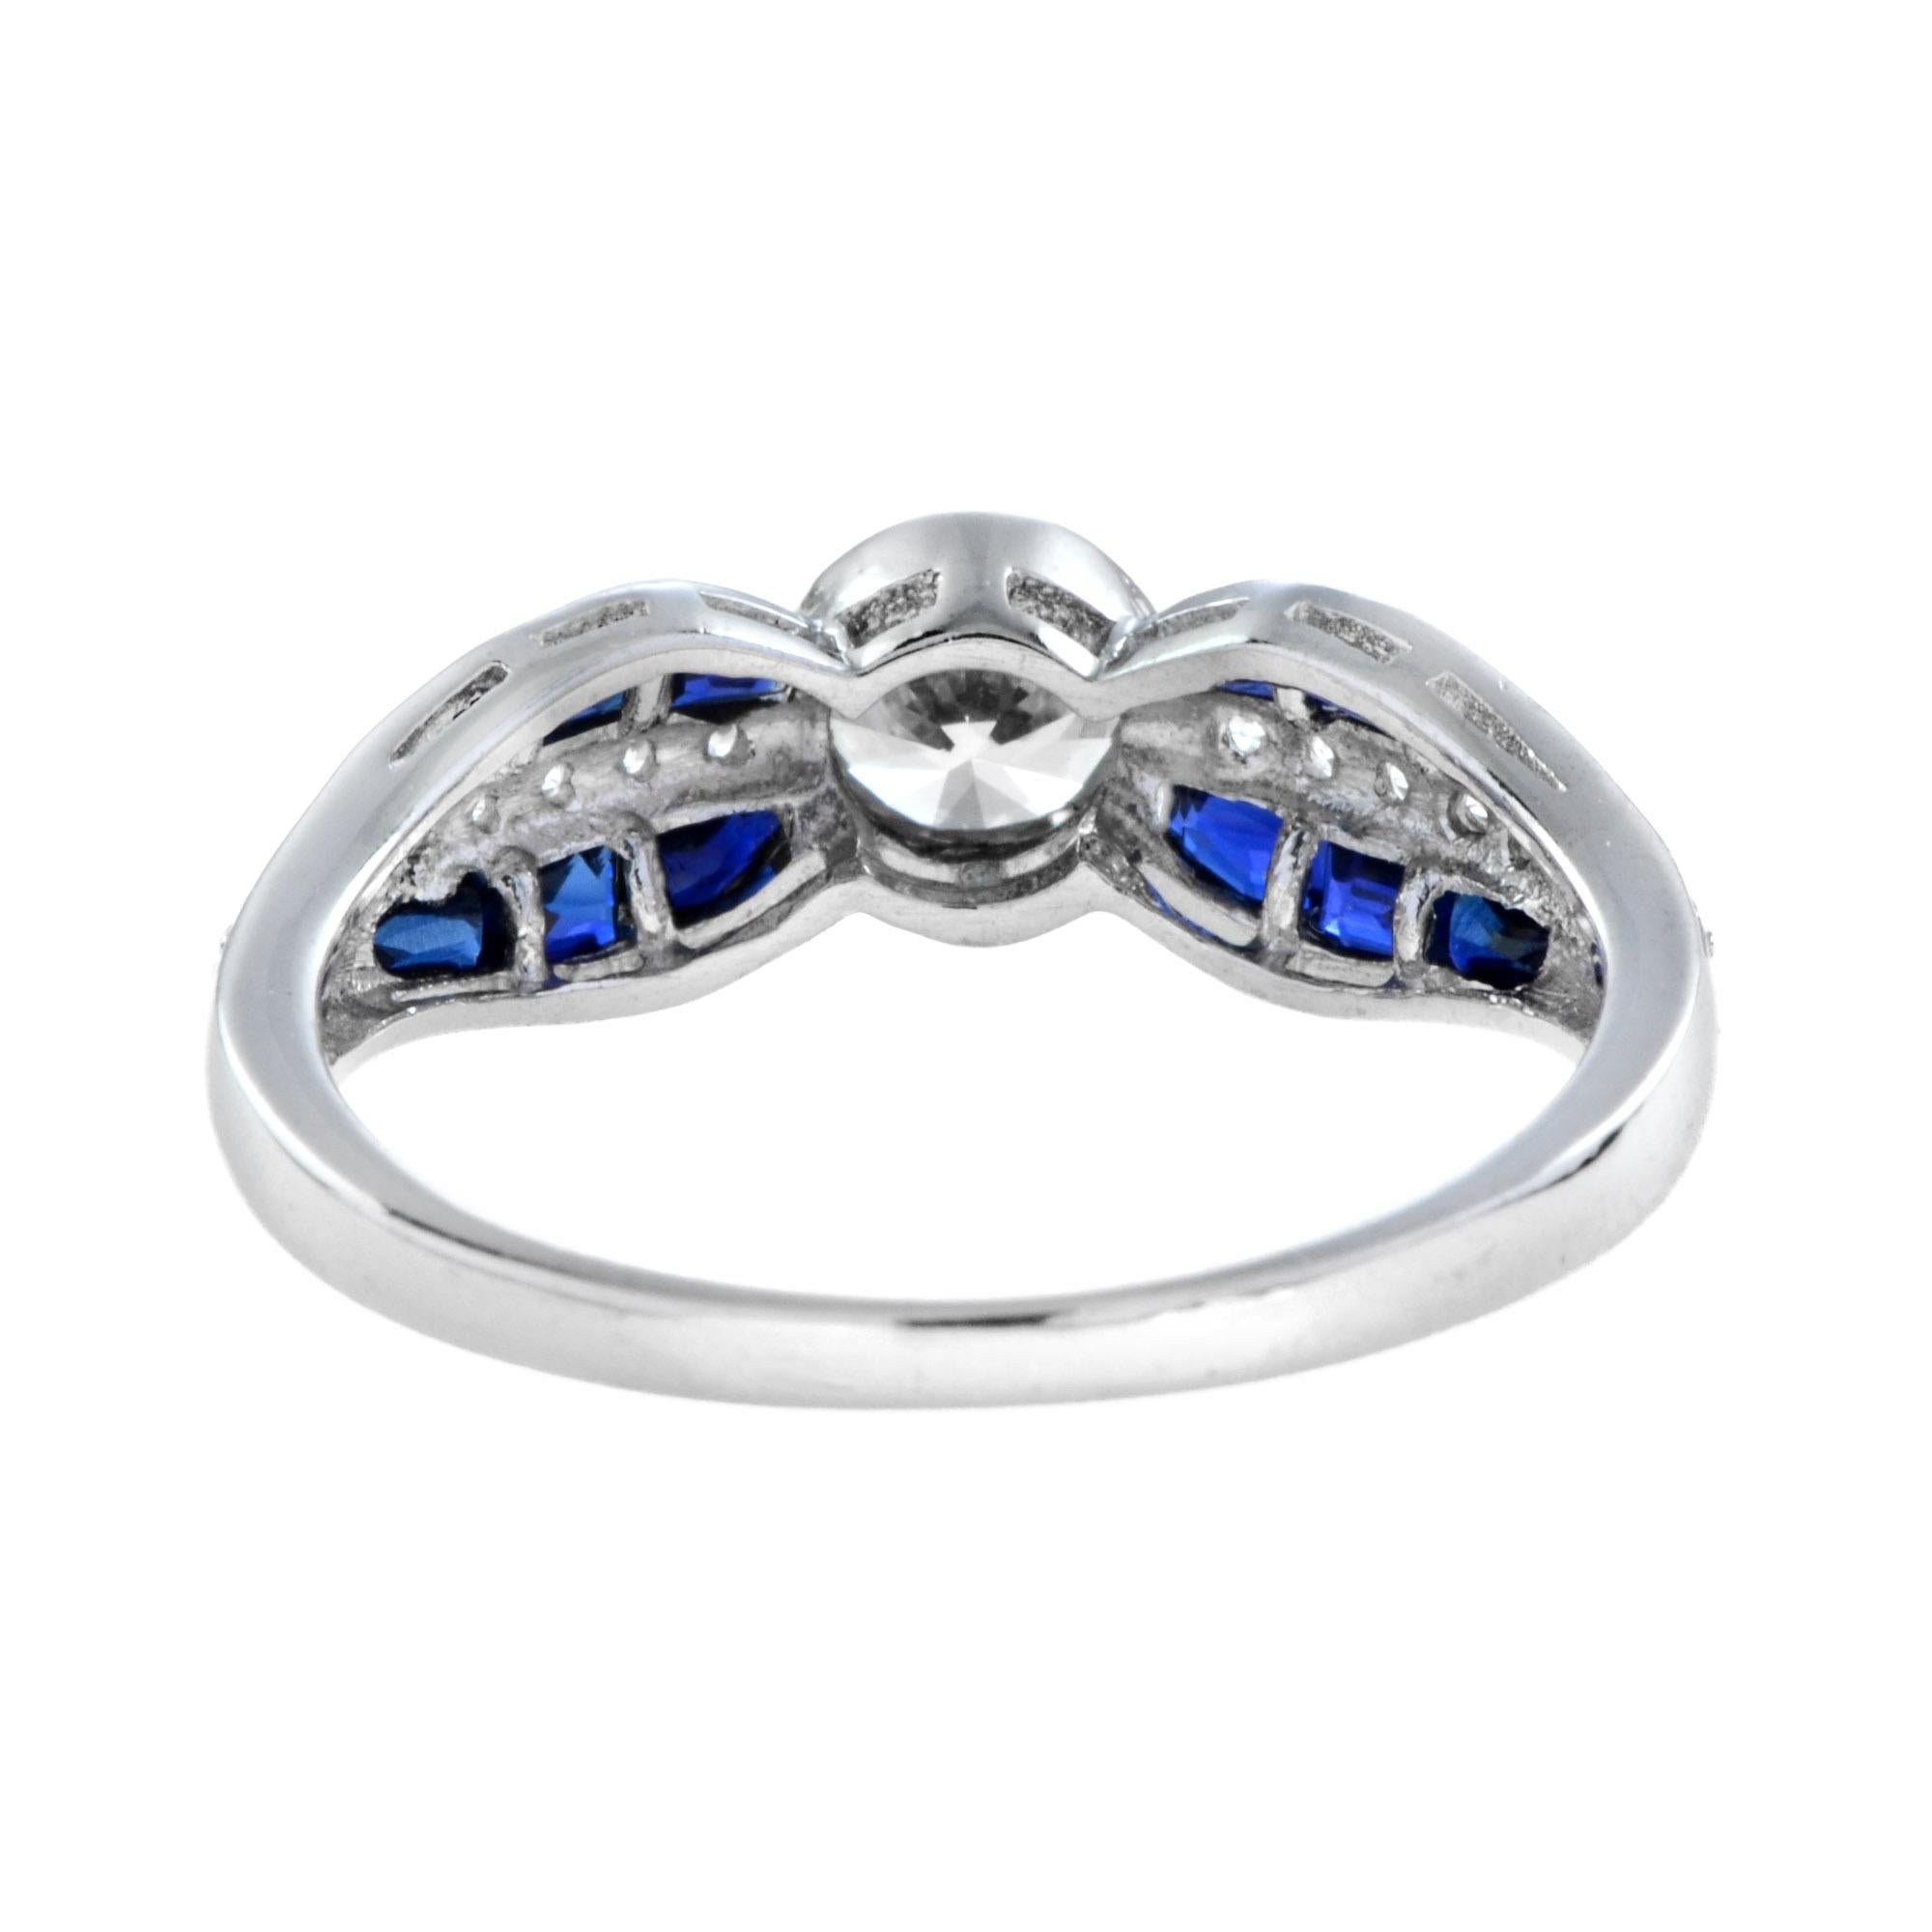 For Sale:  Diamond and Sapphire Art Deco Style Solitaire Ring in 18K White Gold 5